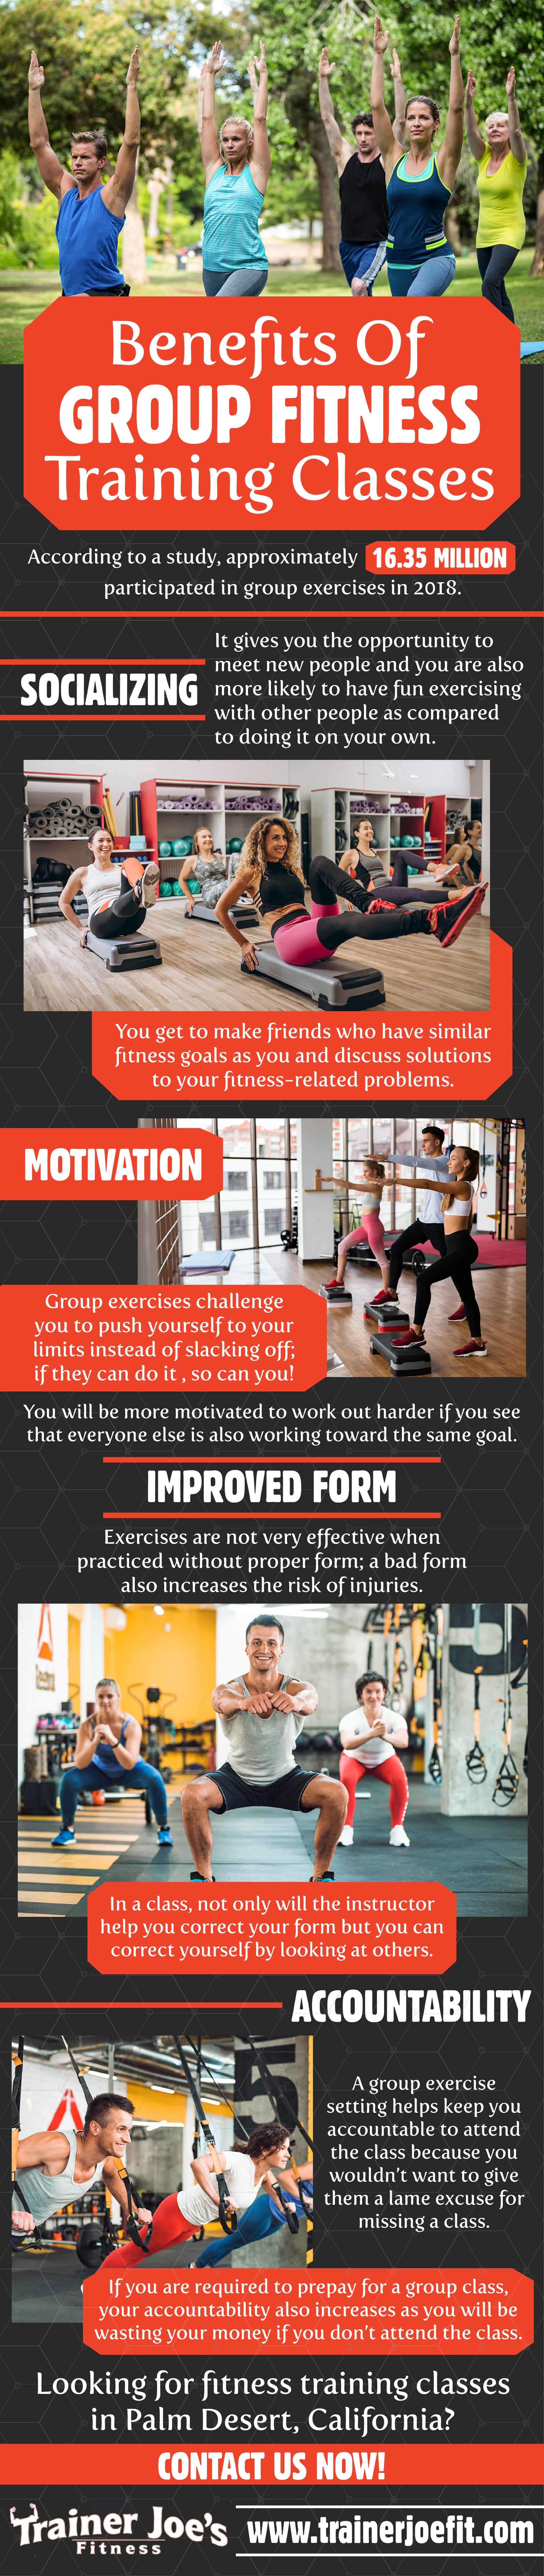 Benefits of Group Fitness Training Classes: